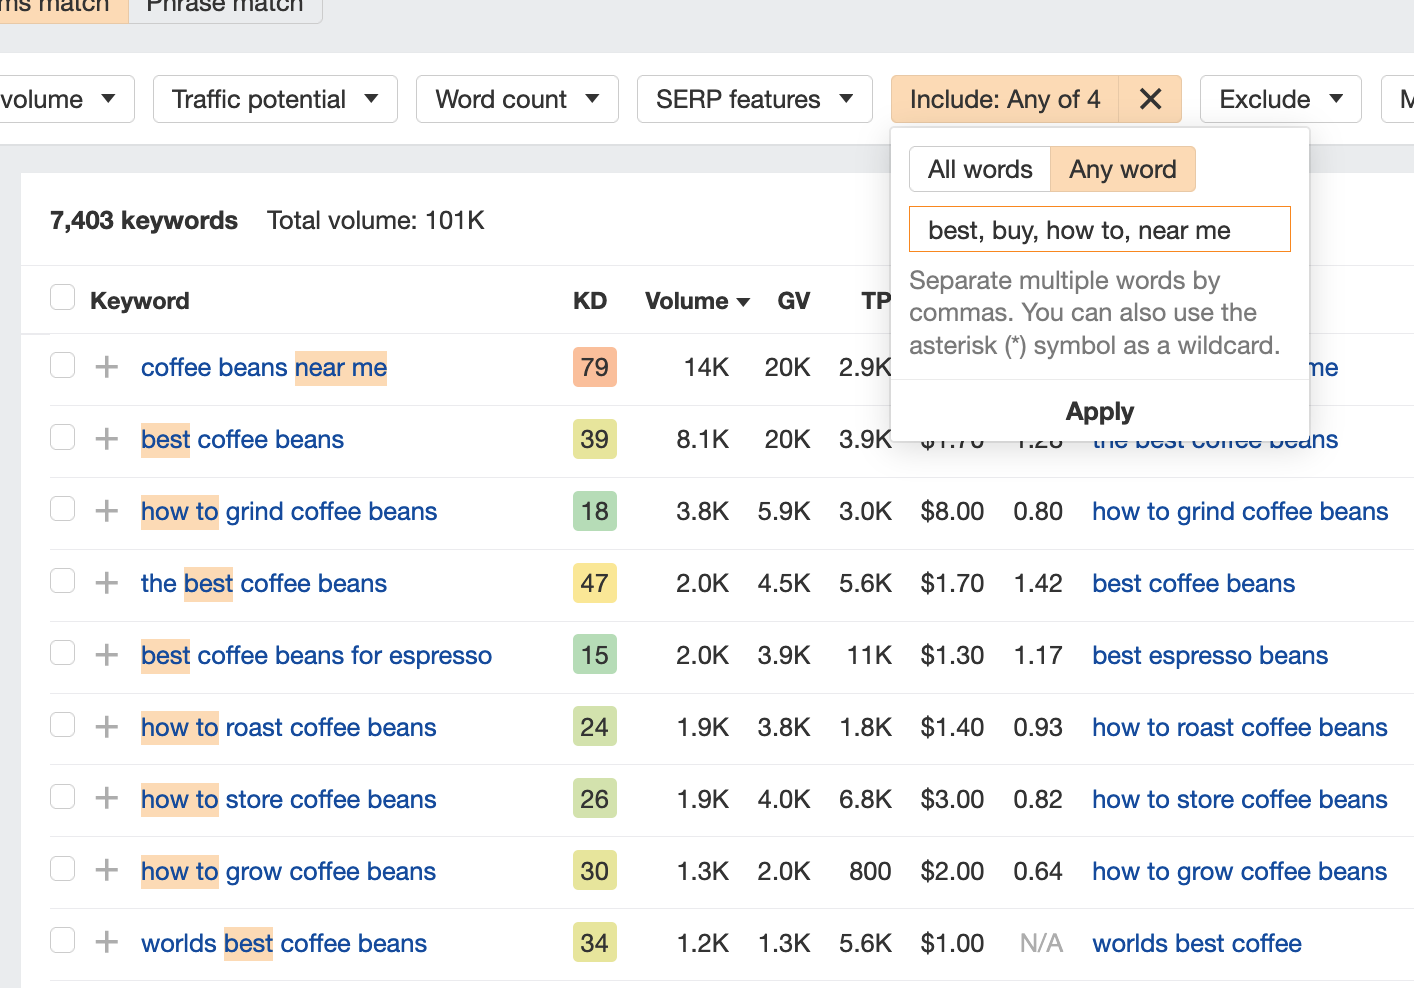 schreenshot of Ahrefs keyword research tool filtering process to filer for high intent keywords by looking for keywords including best, buy, how to, or near me.